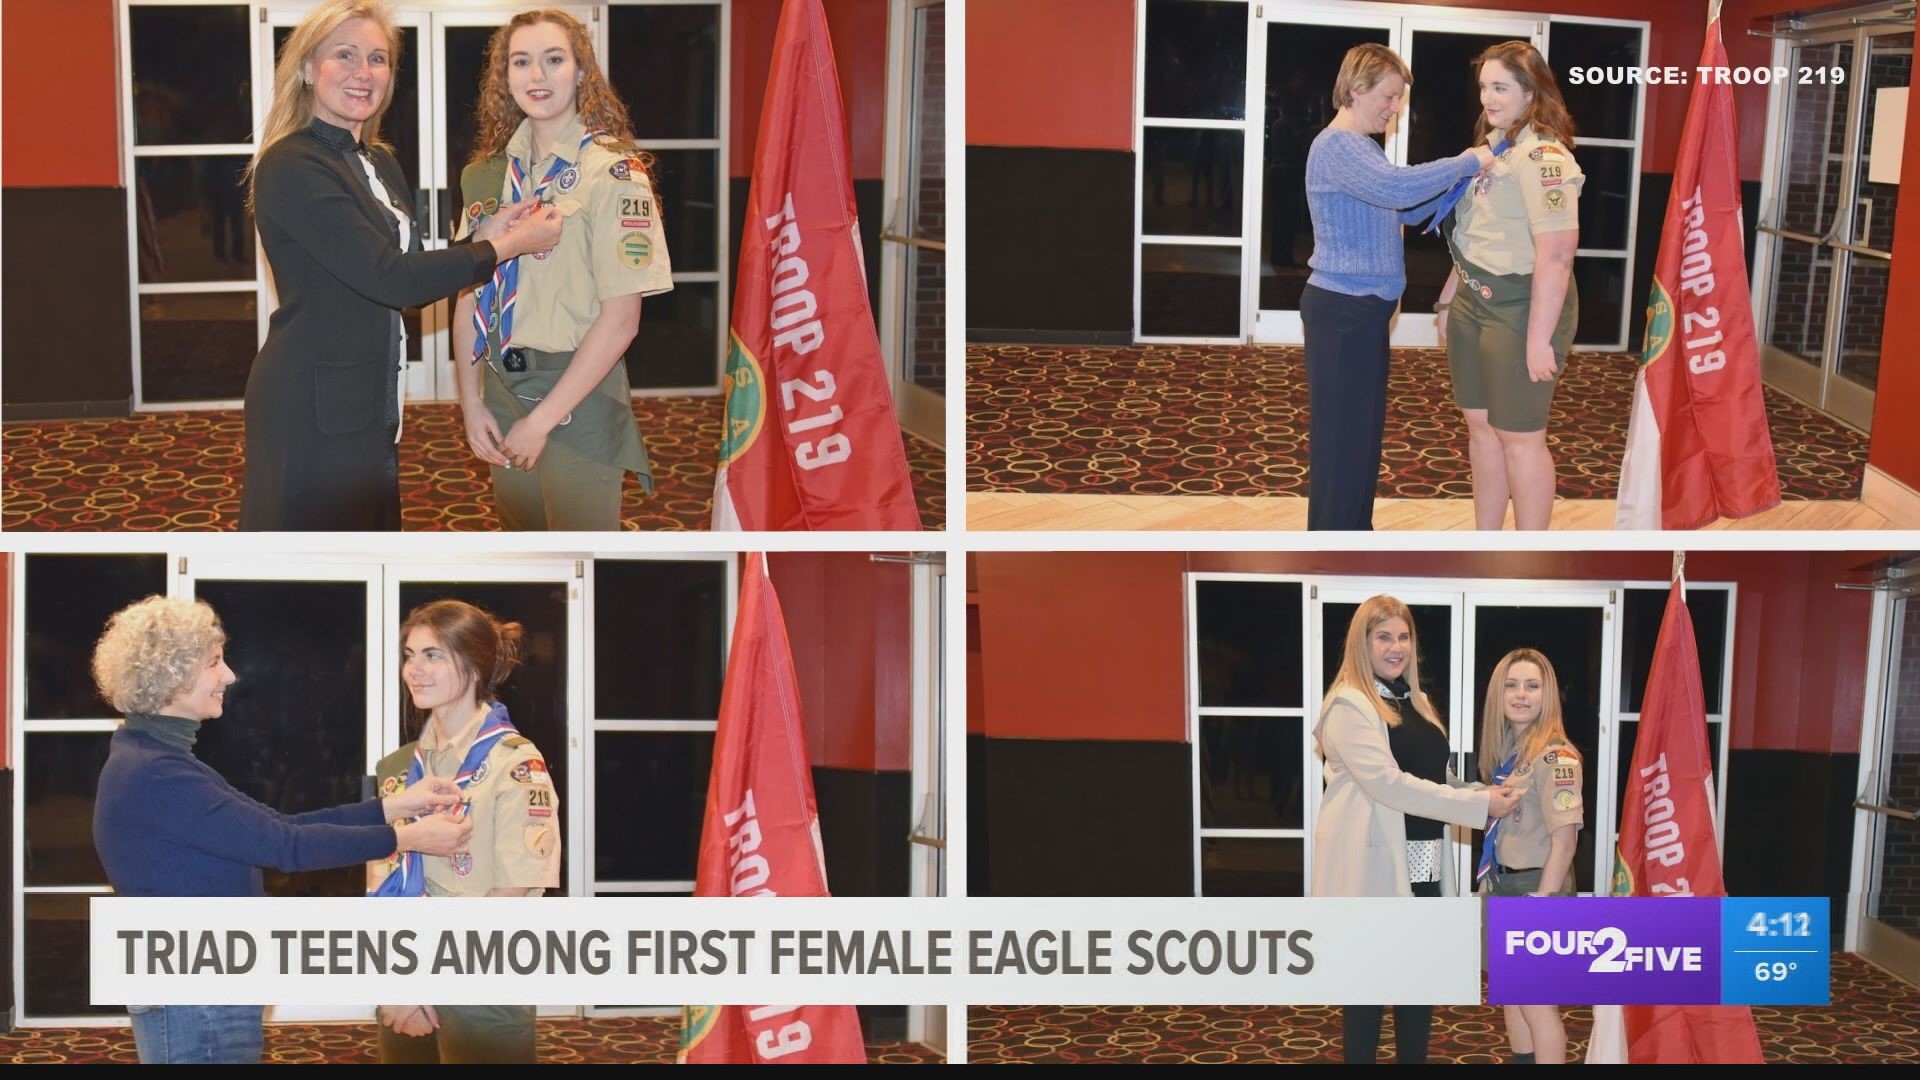 For more than 100 years, Eagle Scout has been a goal only boys could achieve. In 2017, when the Scouts began allowing girls, that all changed.